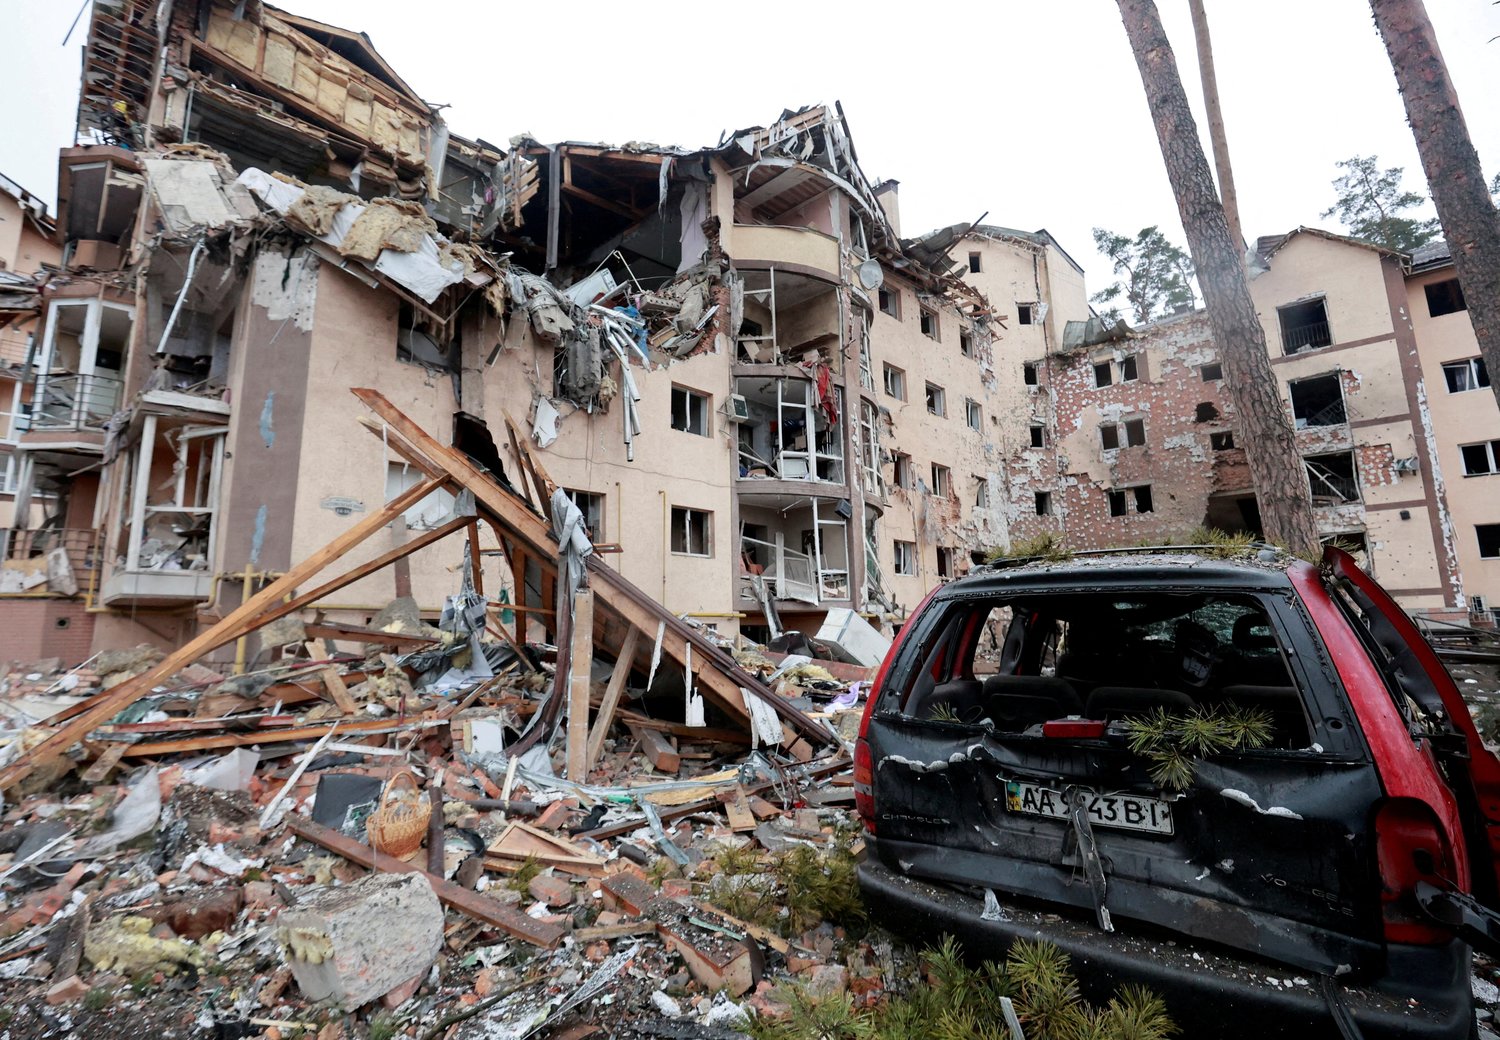 A view shows a residential building destroyed by recent shelling, as Russia's invasion of Ukraine continues in the city of Irpin in the Kyiv region March 2, 2022.